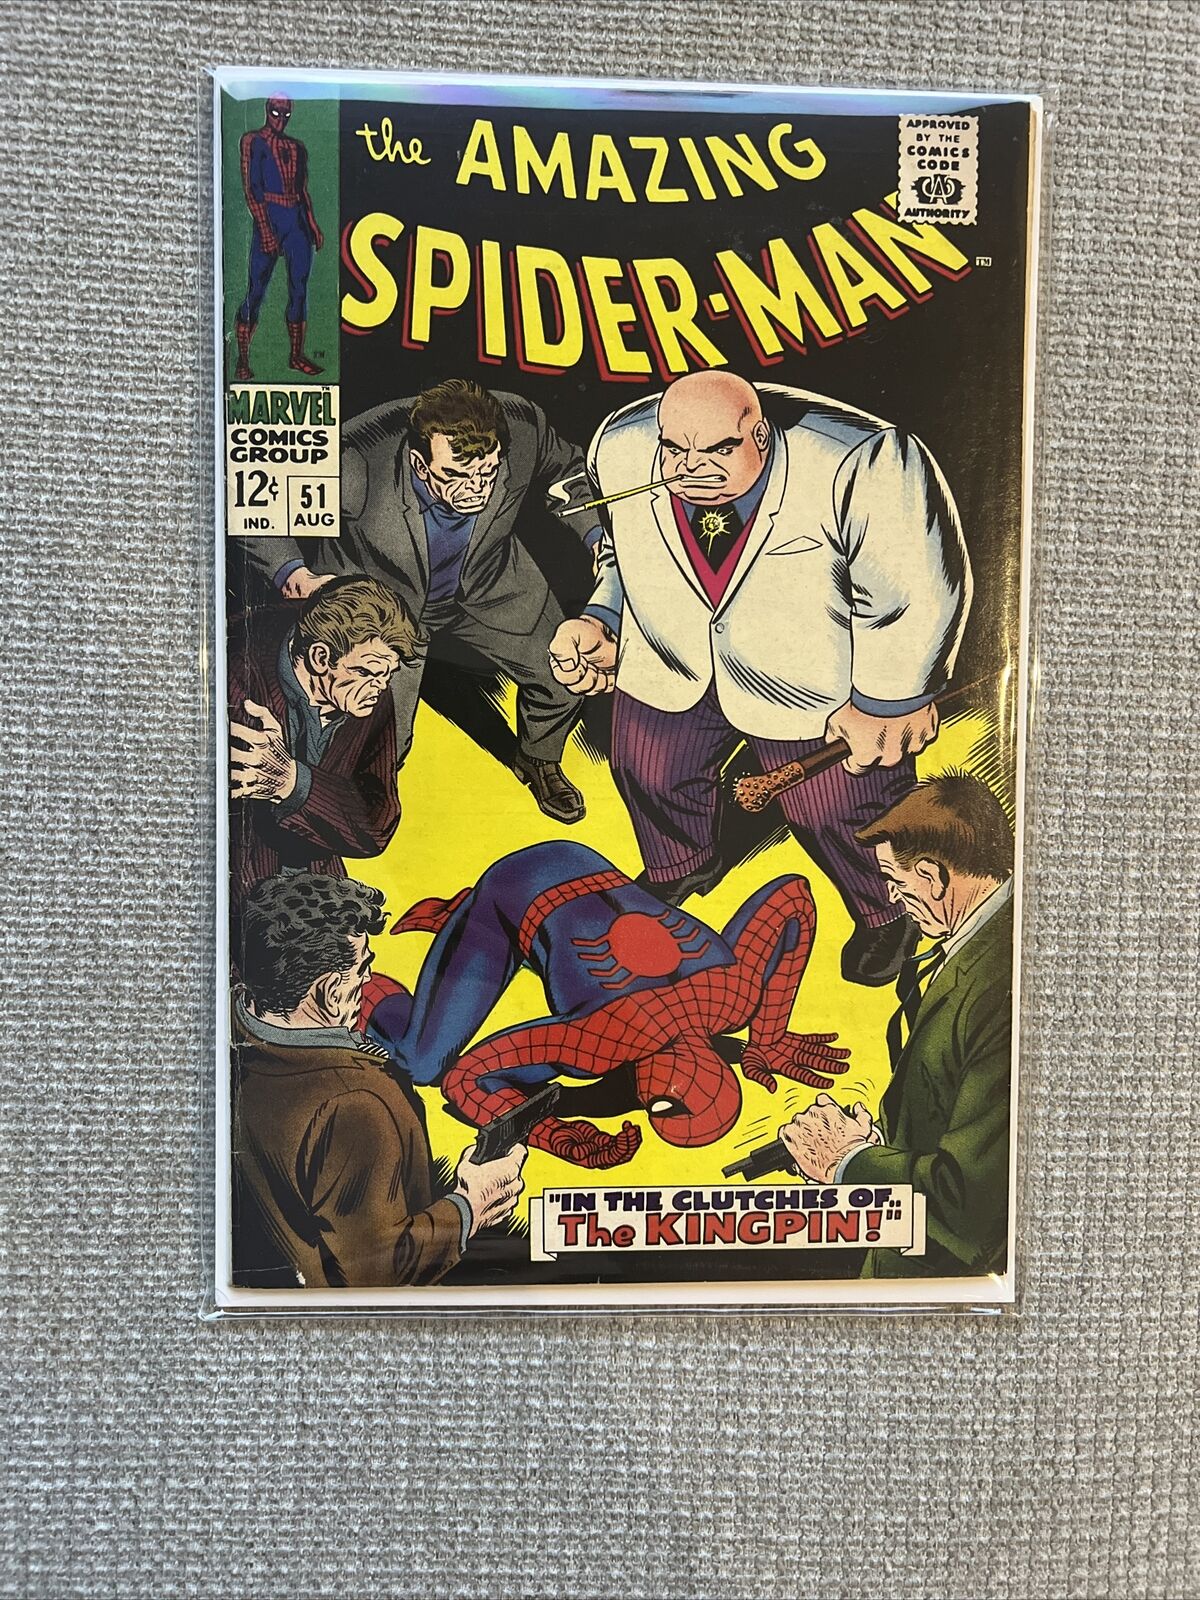 The Amazing Spider-Man #51 (1967) In the Clutches of the Kingpin